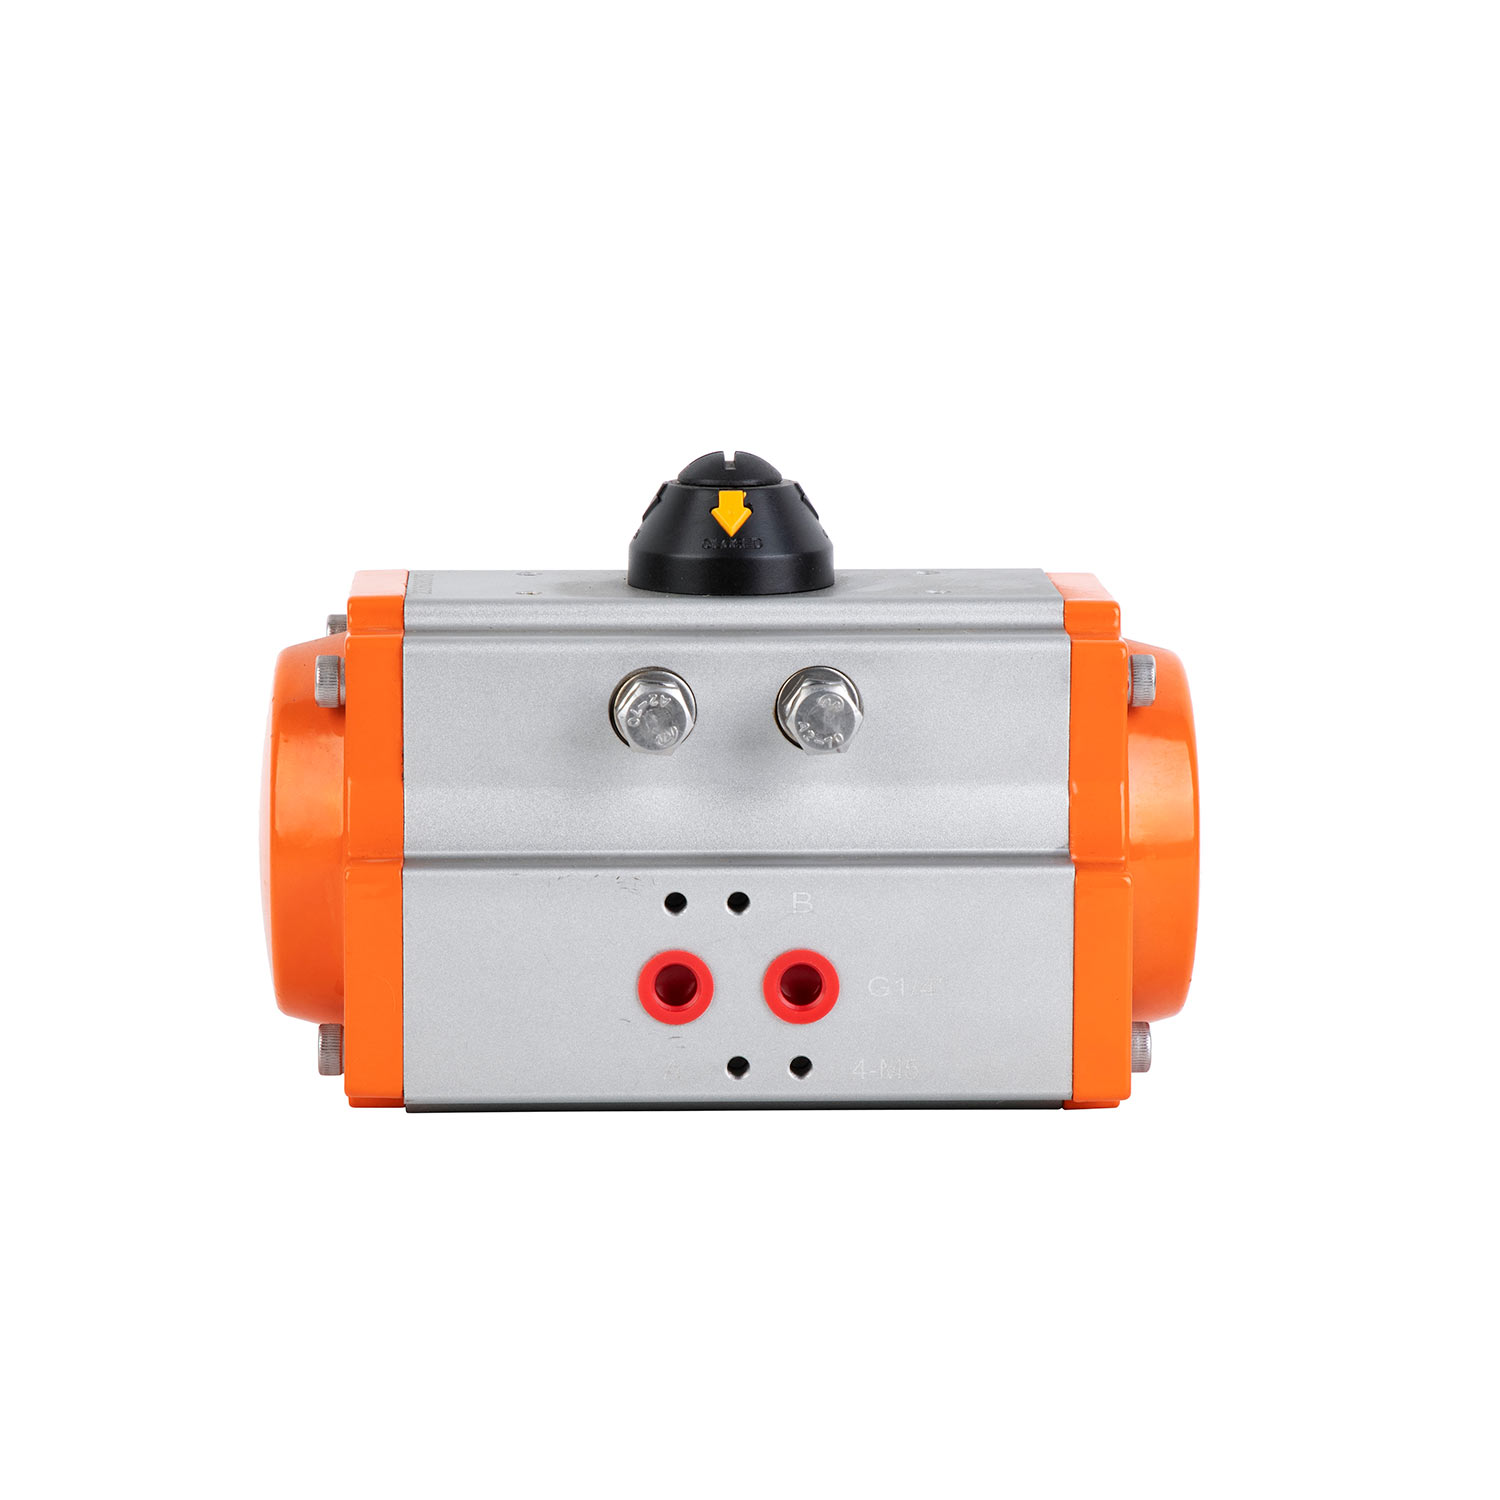 Double Acting Valve Actuator Redefining Precision And Control In Industrial Automation (2)zjc